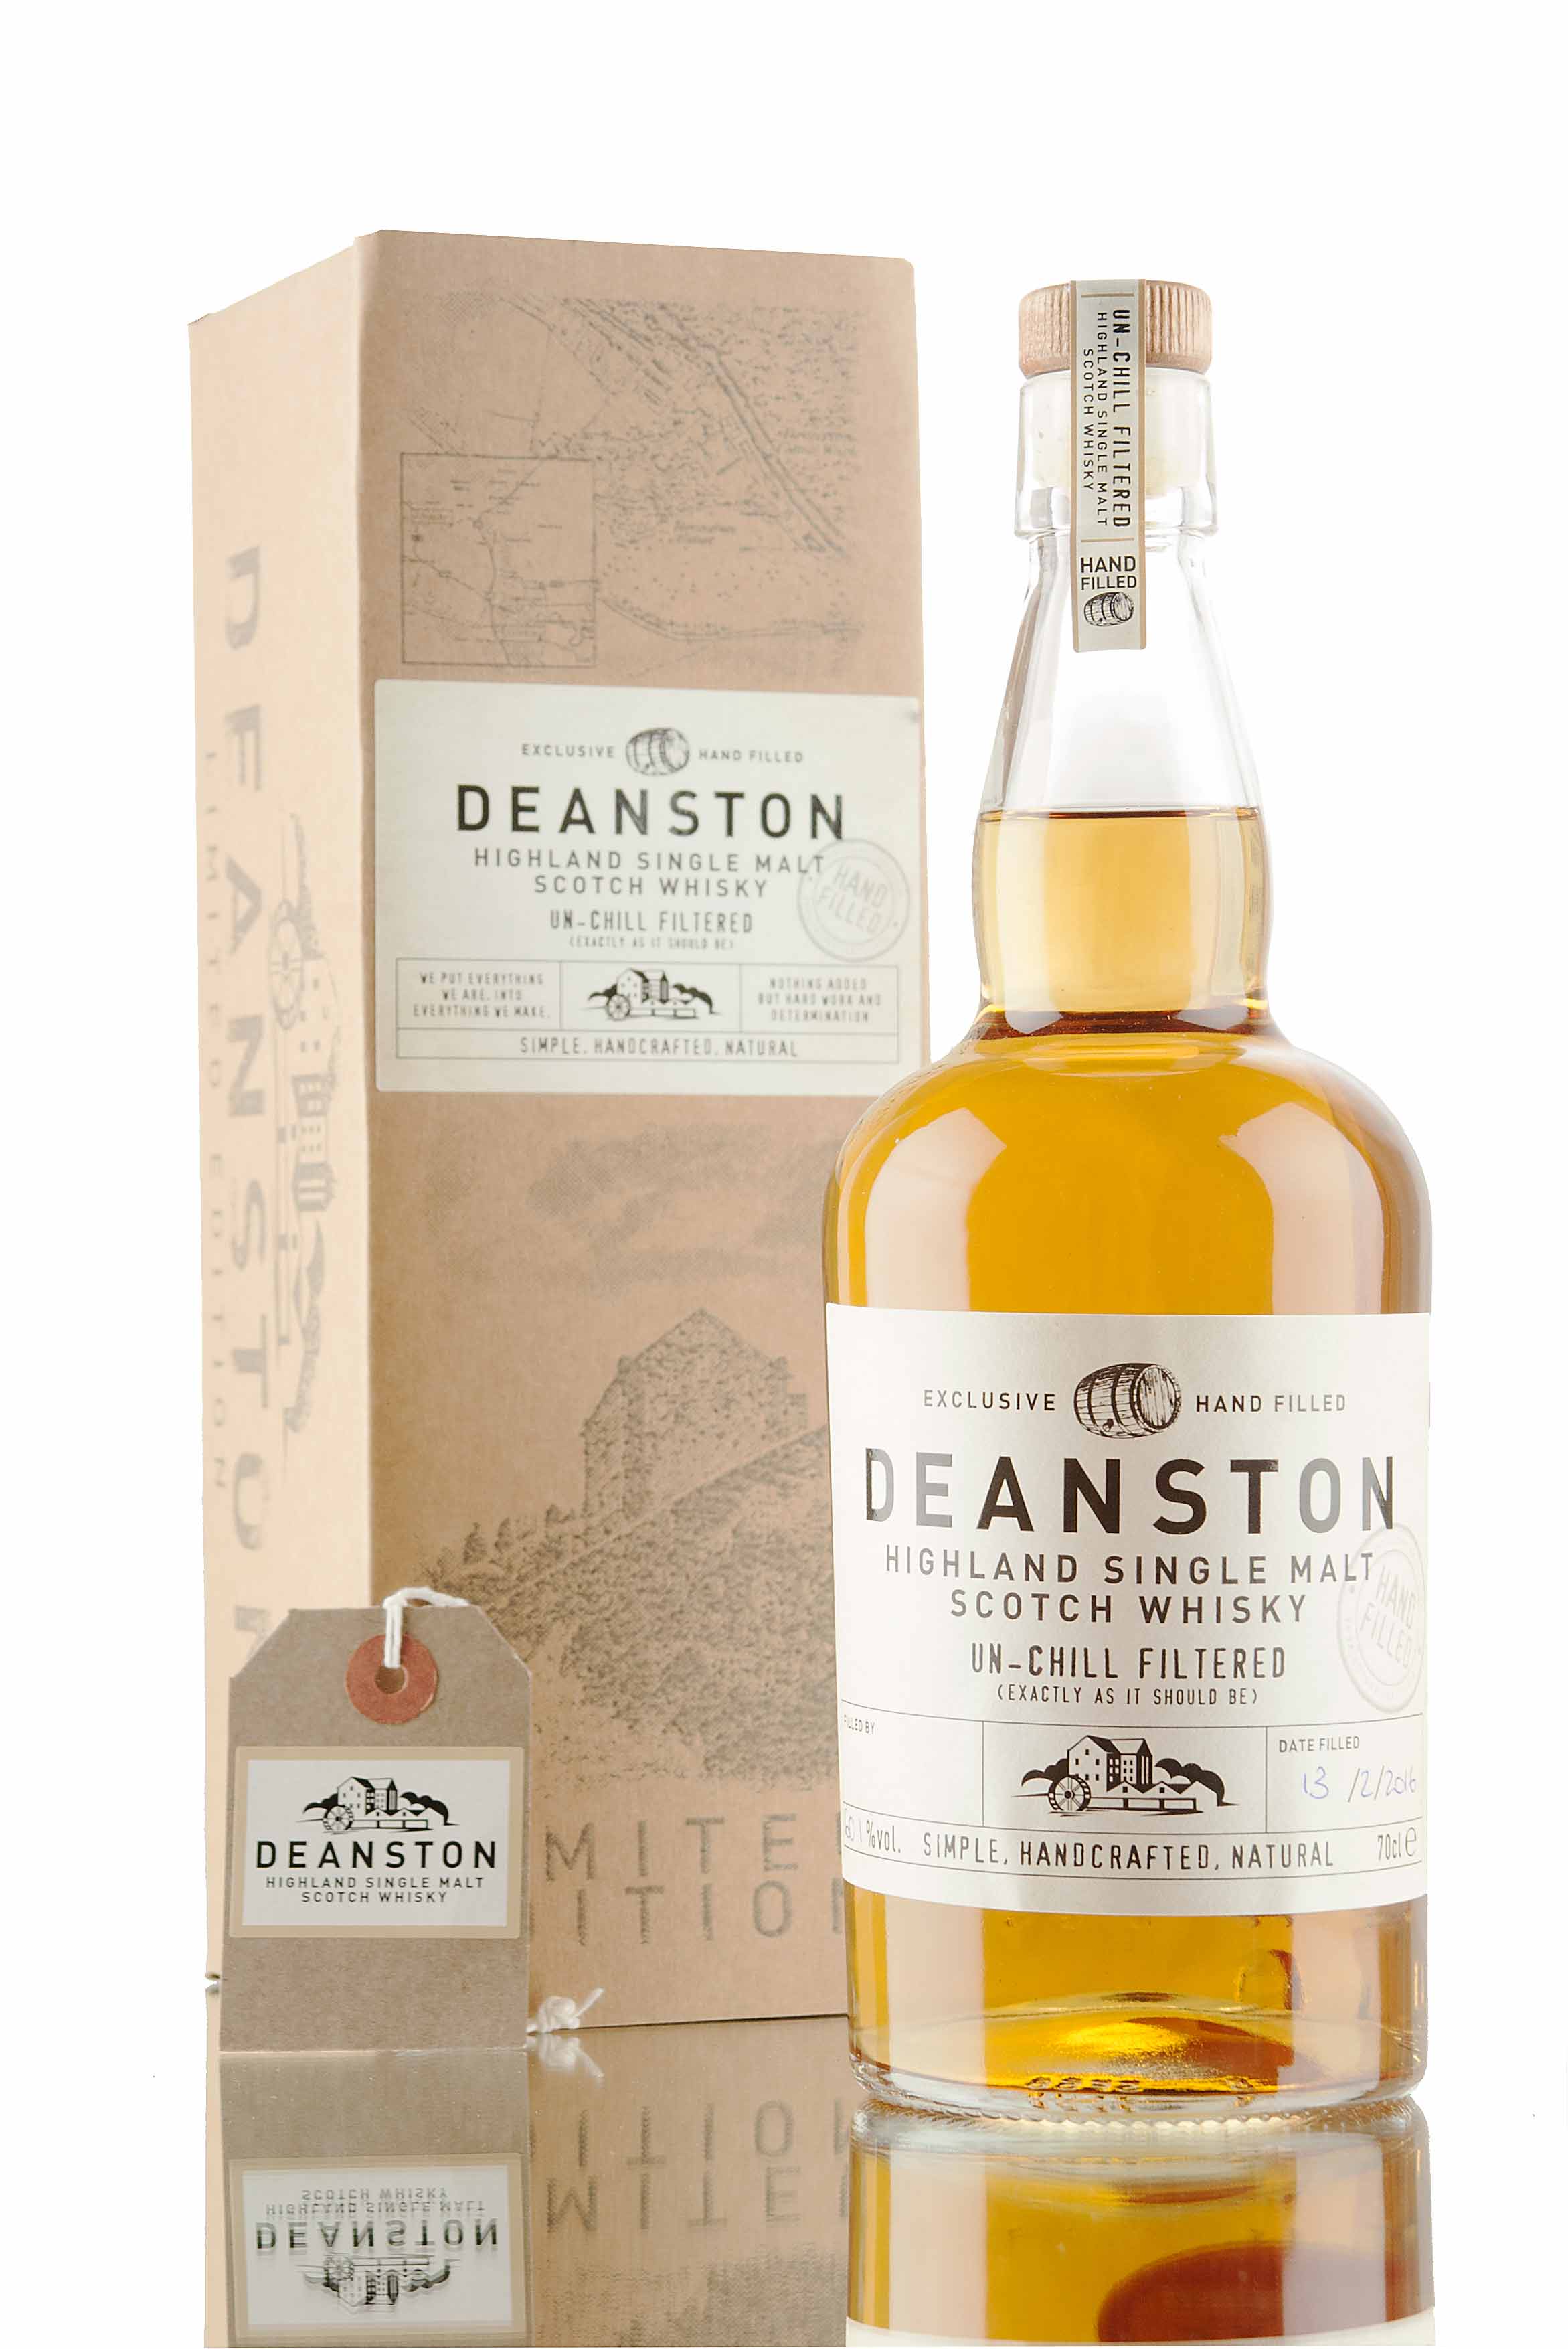 Deanston 11 Year Old Amontillado Sherry Cask Finish